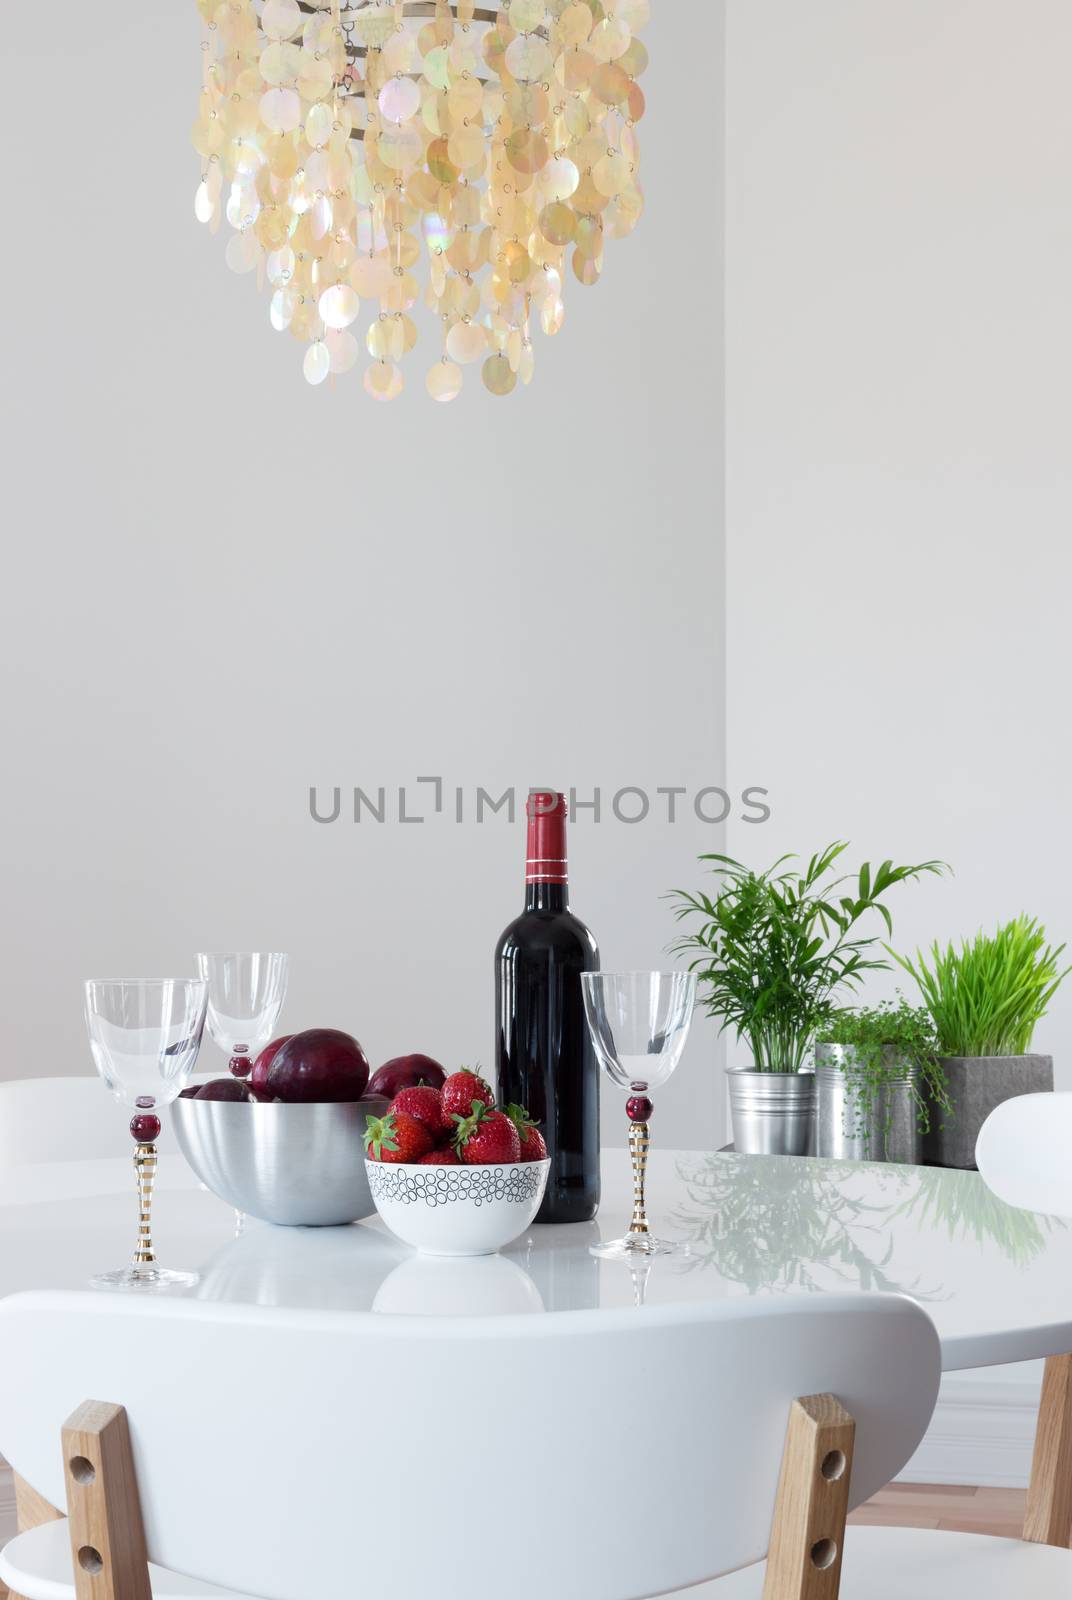 Elegant table with red wine and fruits by anikasalsera